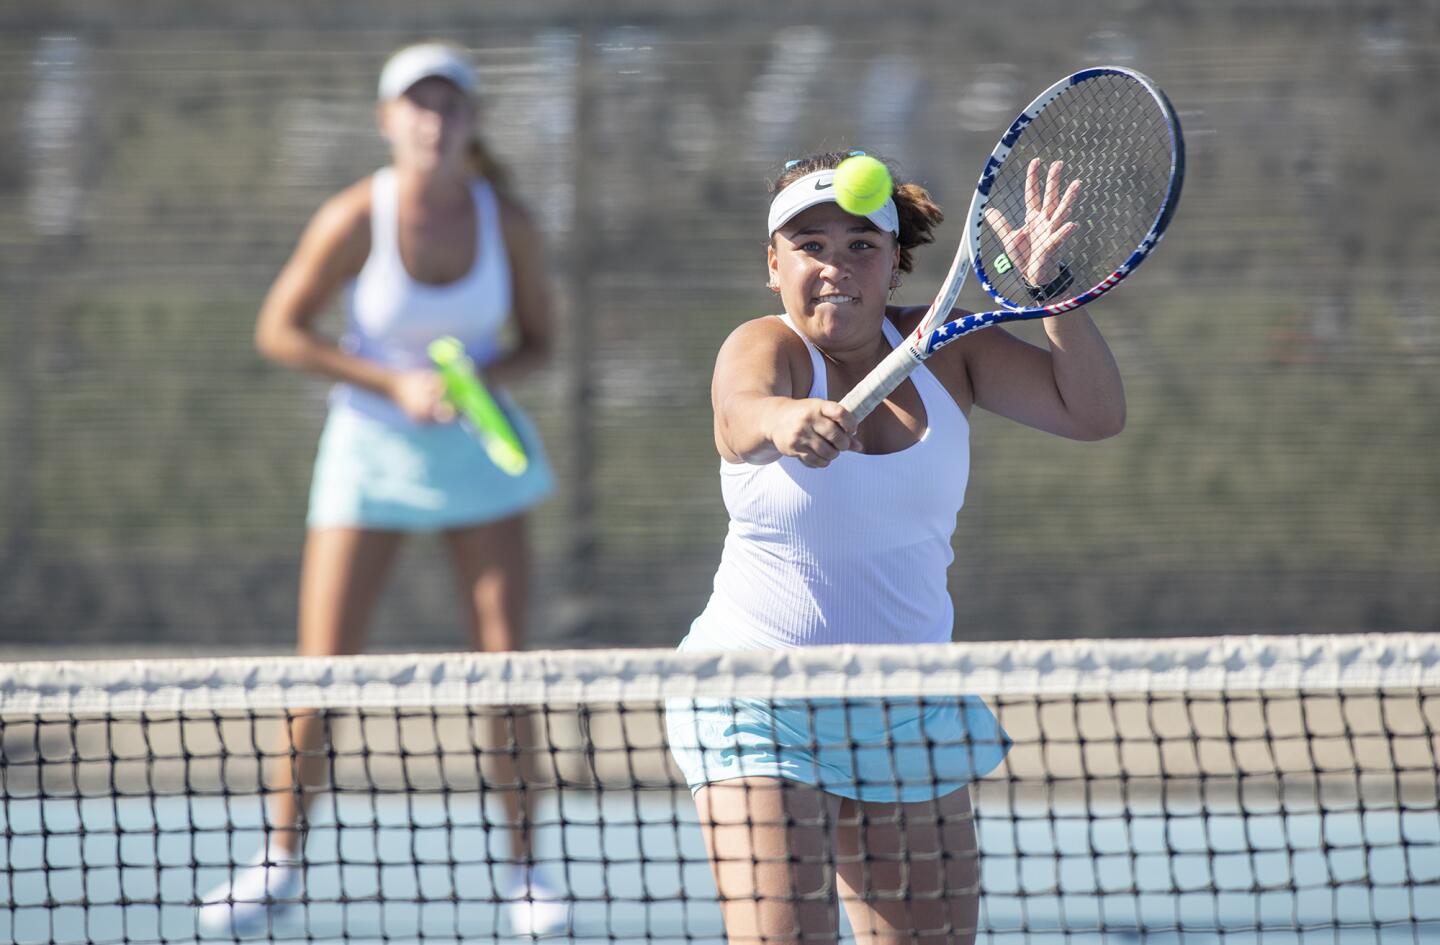 Corona del Mar's Dylan Matesky returns a shot during a doubles match with her partner Alden Mulroy against Palos Verdes in a nonleague match on Wednesday, September 12.